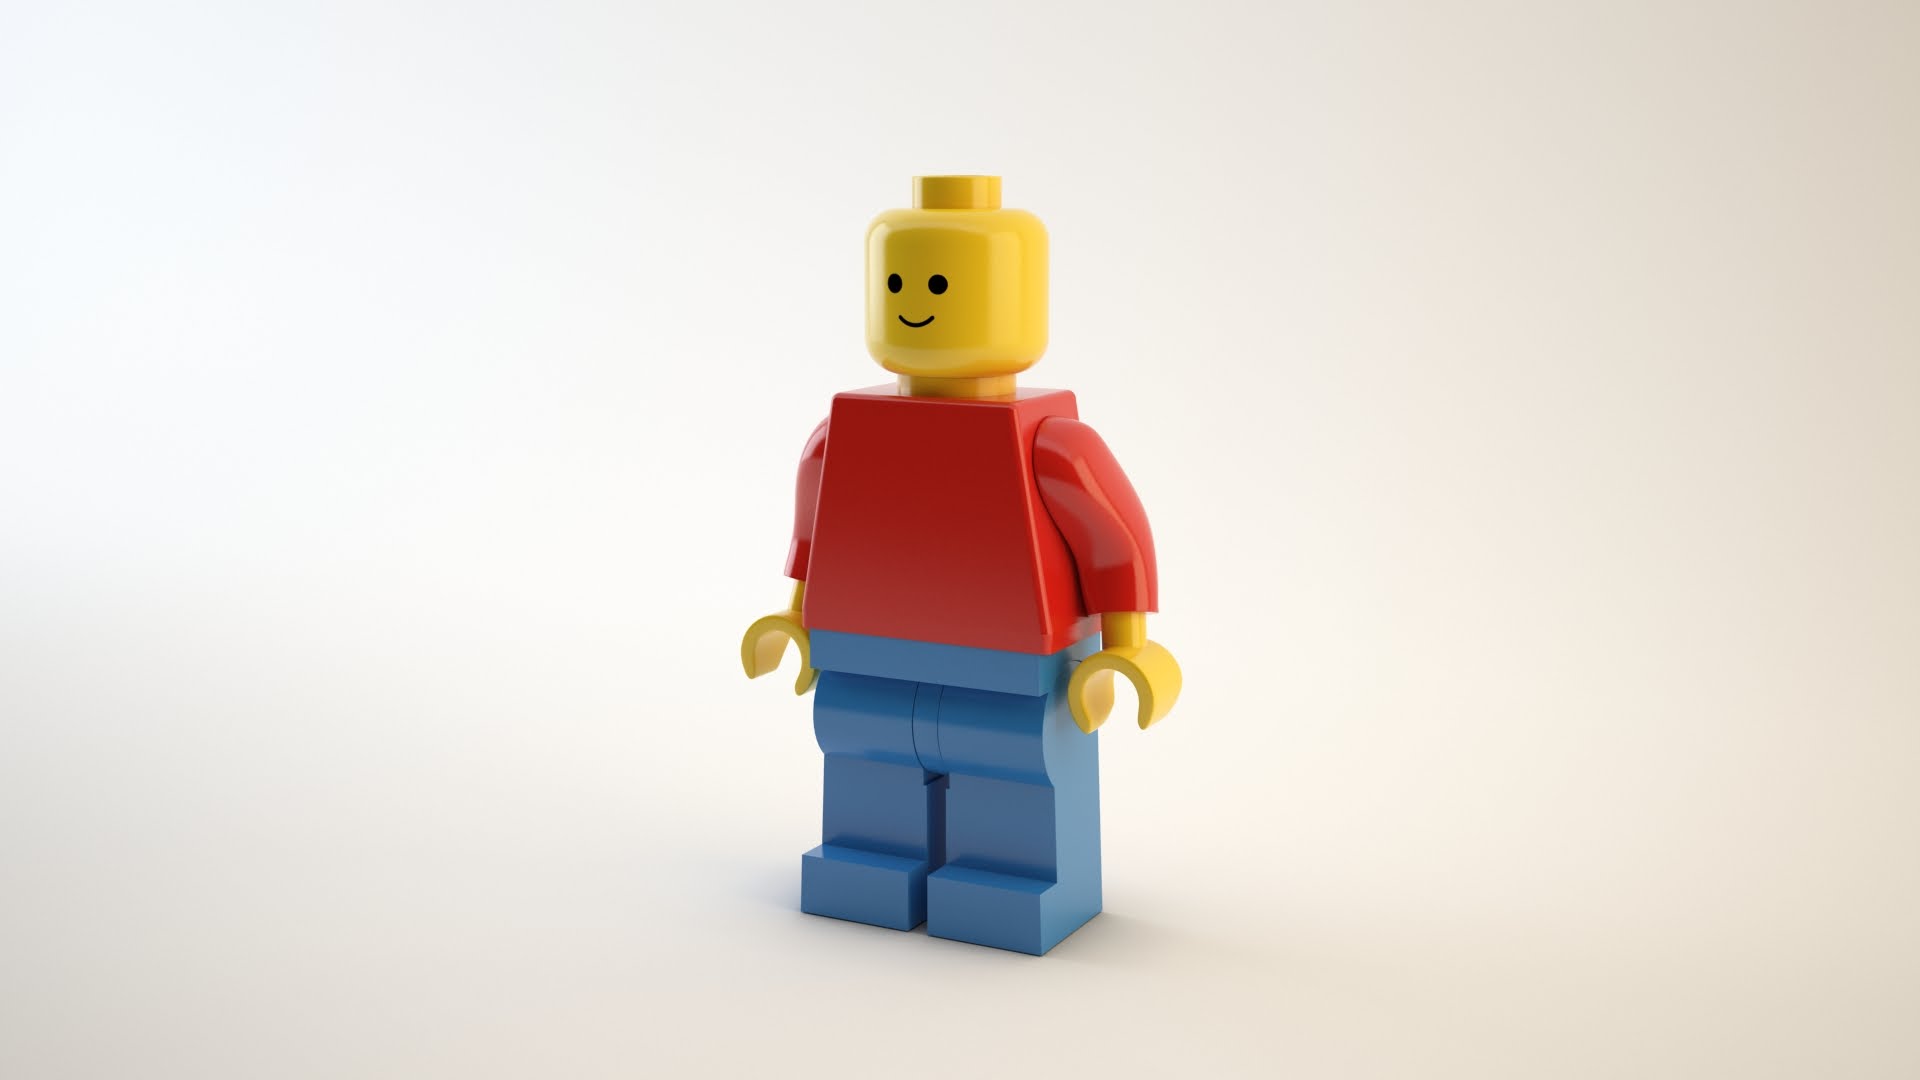 3ds max modeling - LEGO MAN Part2 - YouTube. 